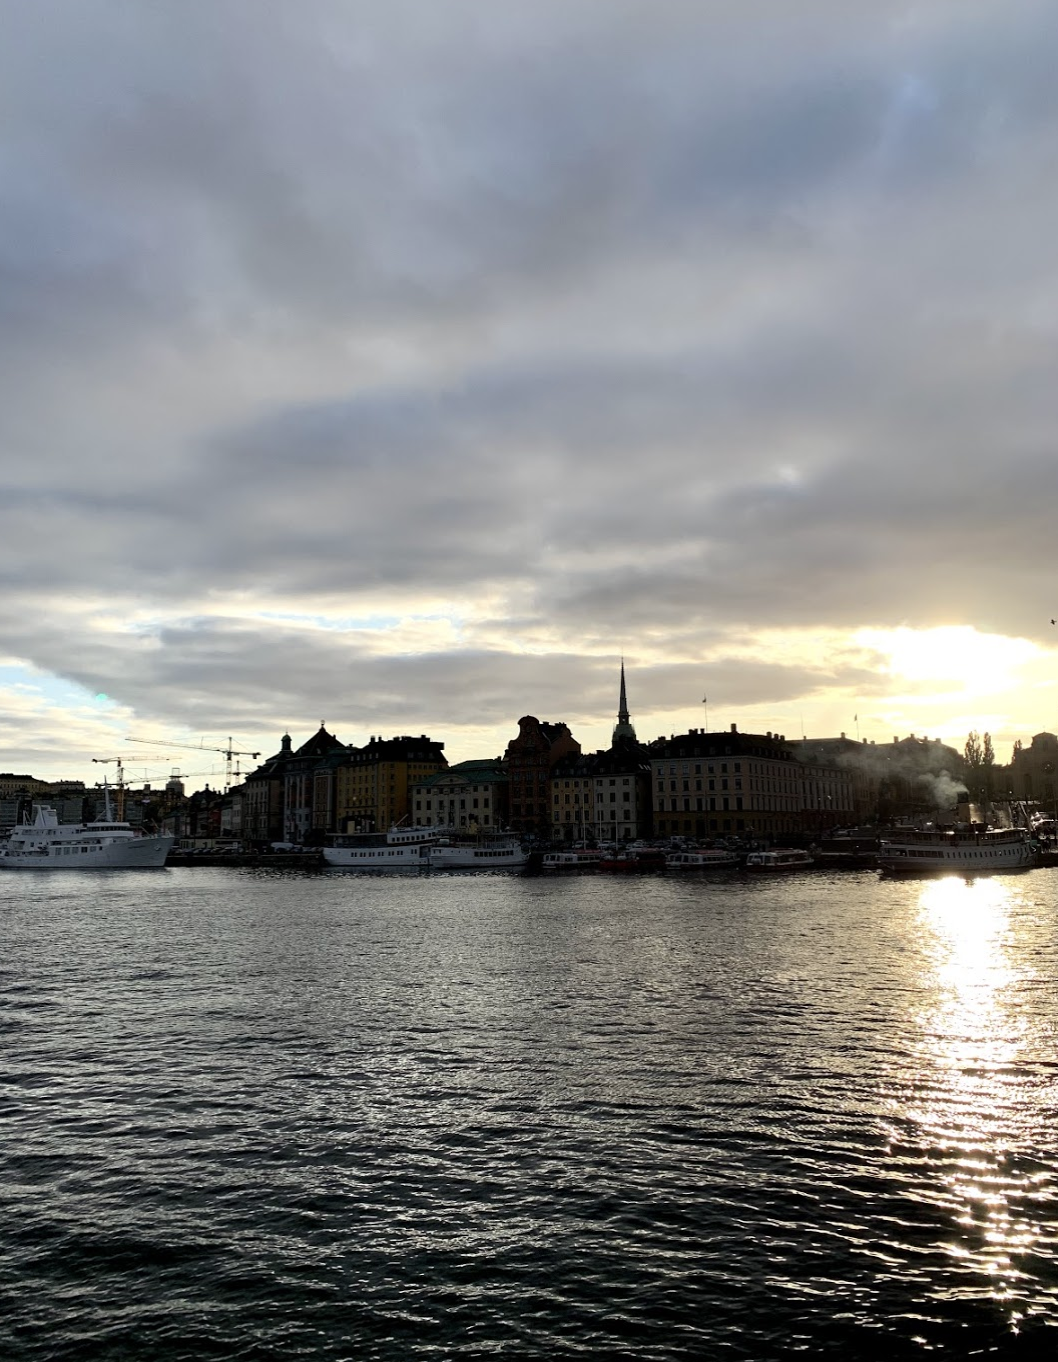 Sunset over Stockholm, Sweden on the way to Gamla Stan